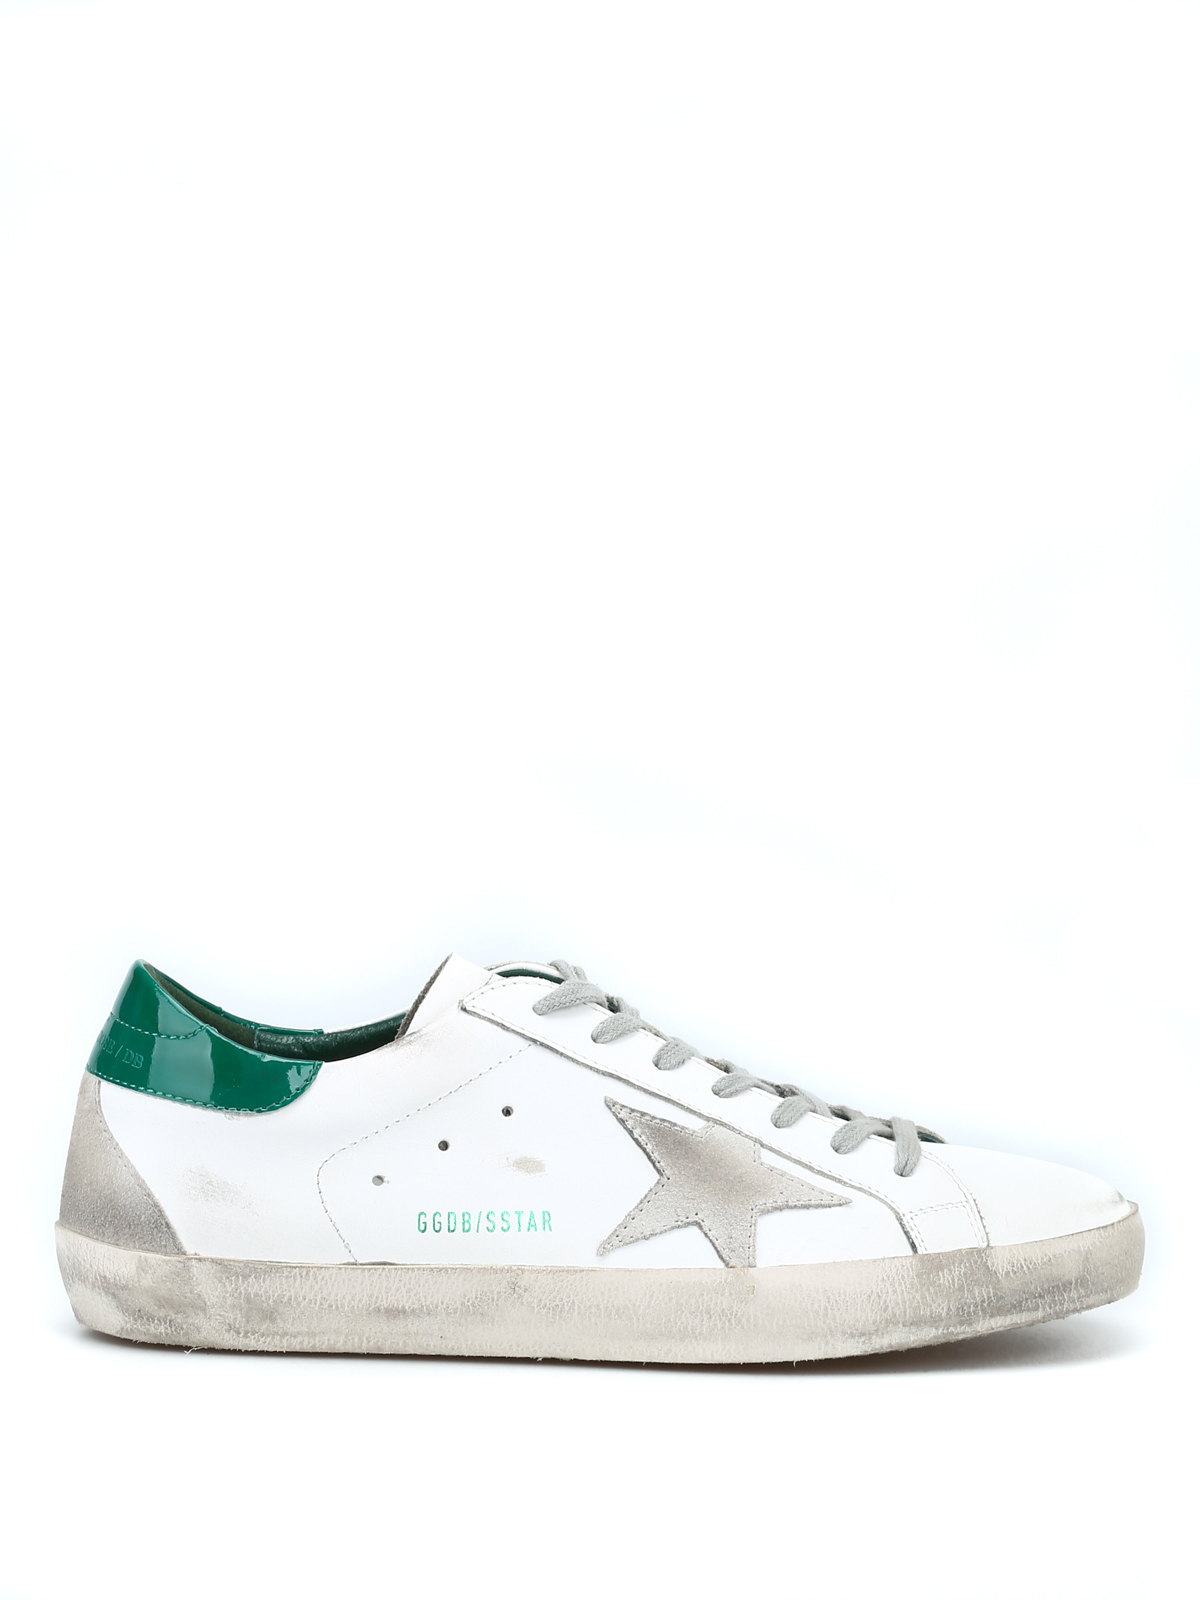 Golden Goose - White and green 